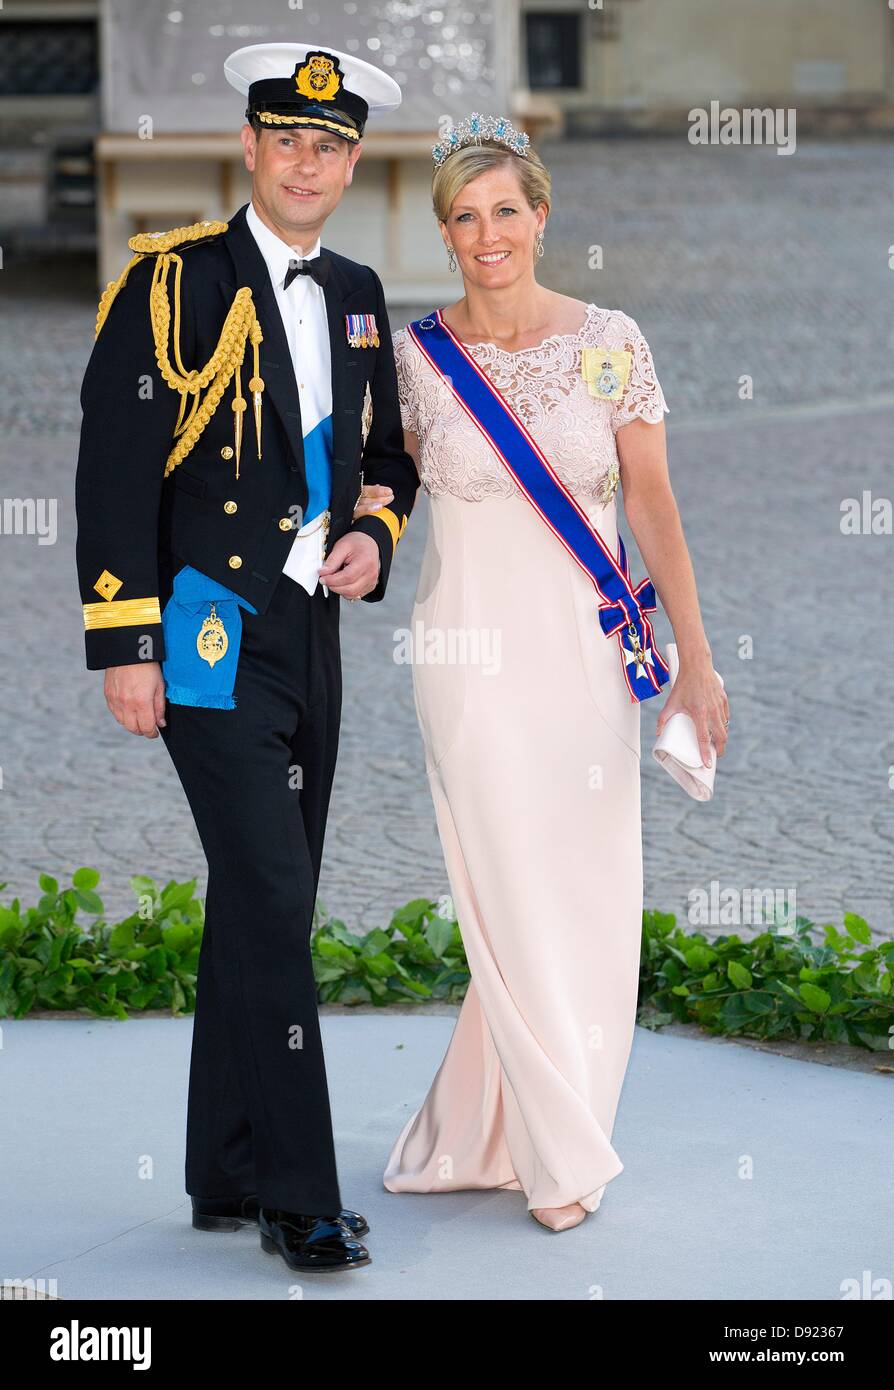 Stockholm, Sweden. 8th June, 2013. Edward, Count of Wessex and Sophie, Countess Wessex arrive for the wedding of Swedish Princess Madeleine and Chris O'Neill at the Chapel of the Royal Palace in Stockholm, Sweden, 8 June 2013. Photo: Patrick van Katwijk / Alamy Live News Stock Photo